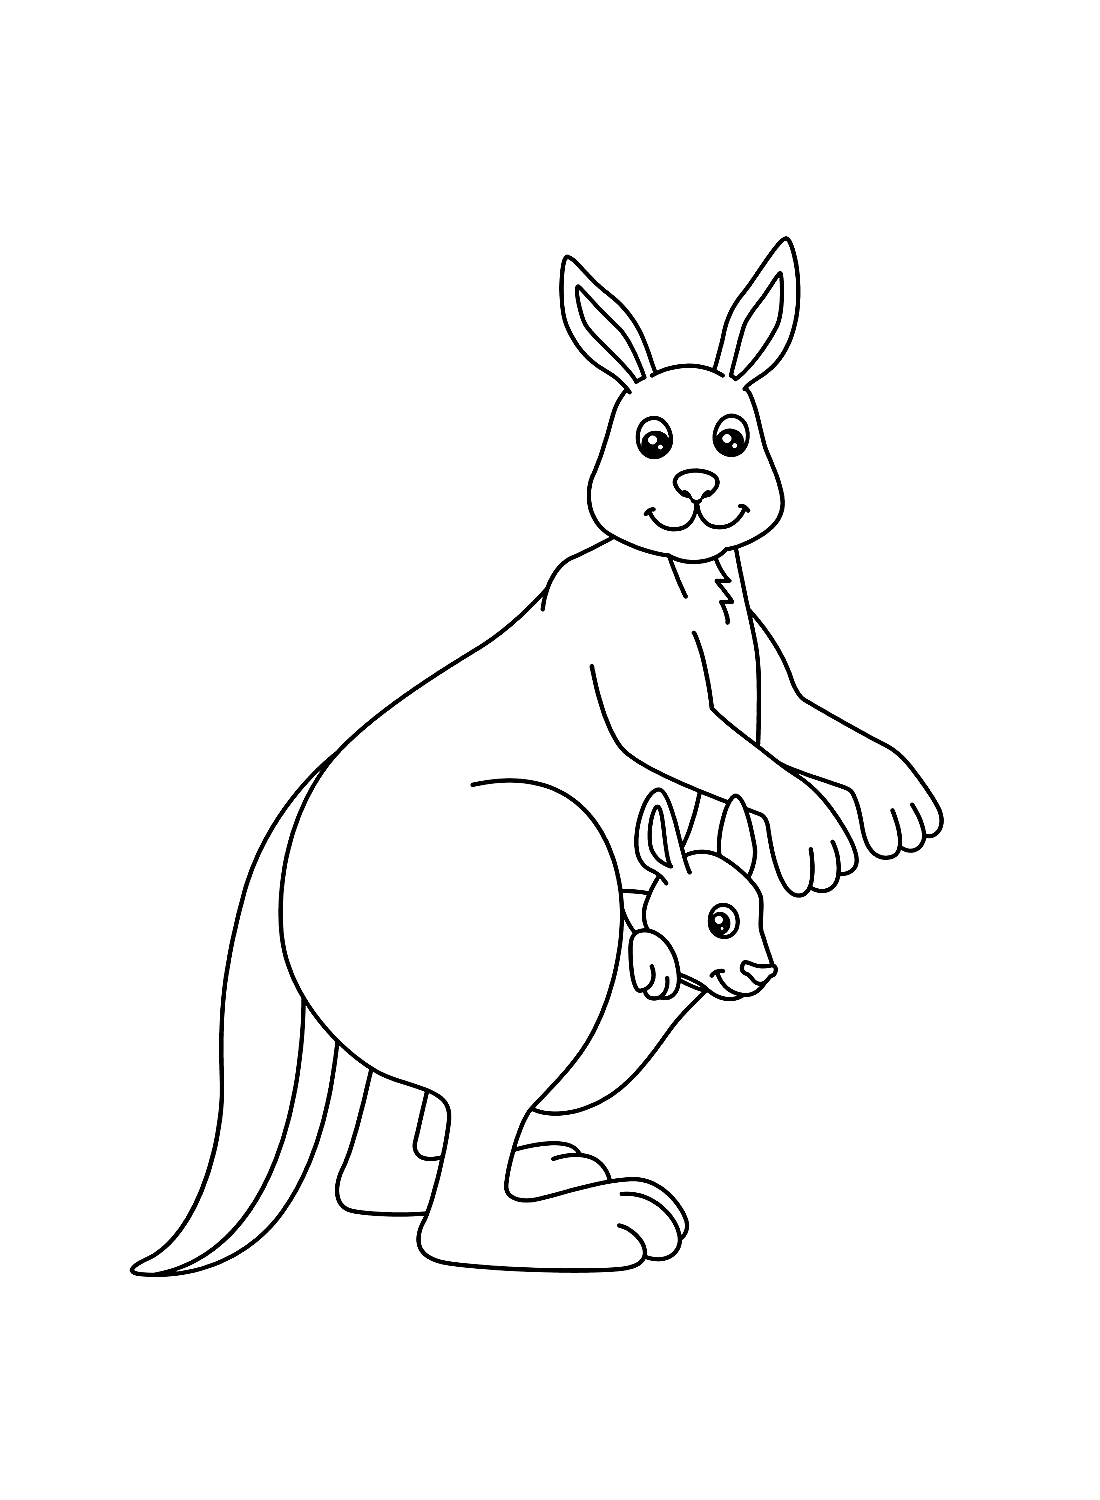 Very Simple Kangaroo Coloring Pages